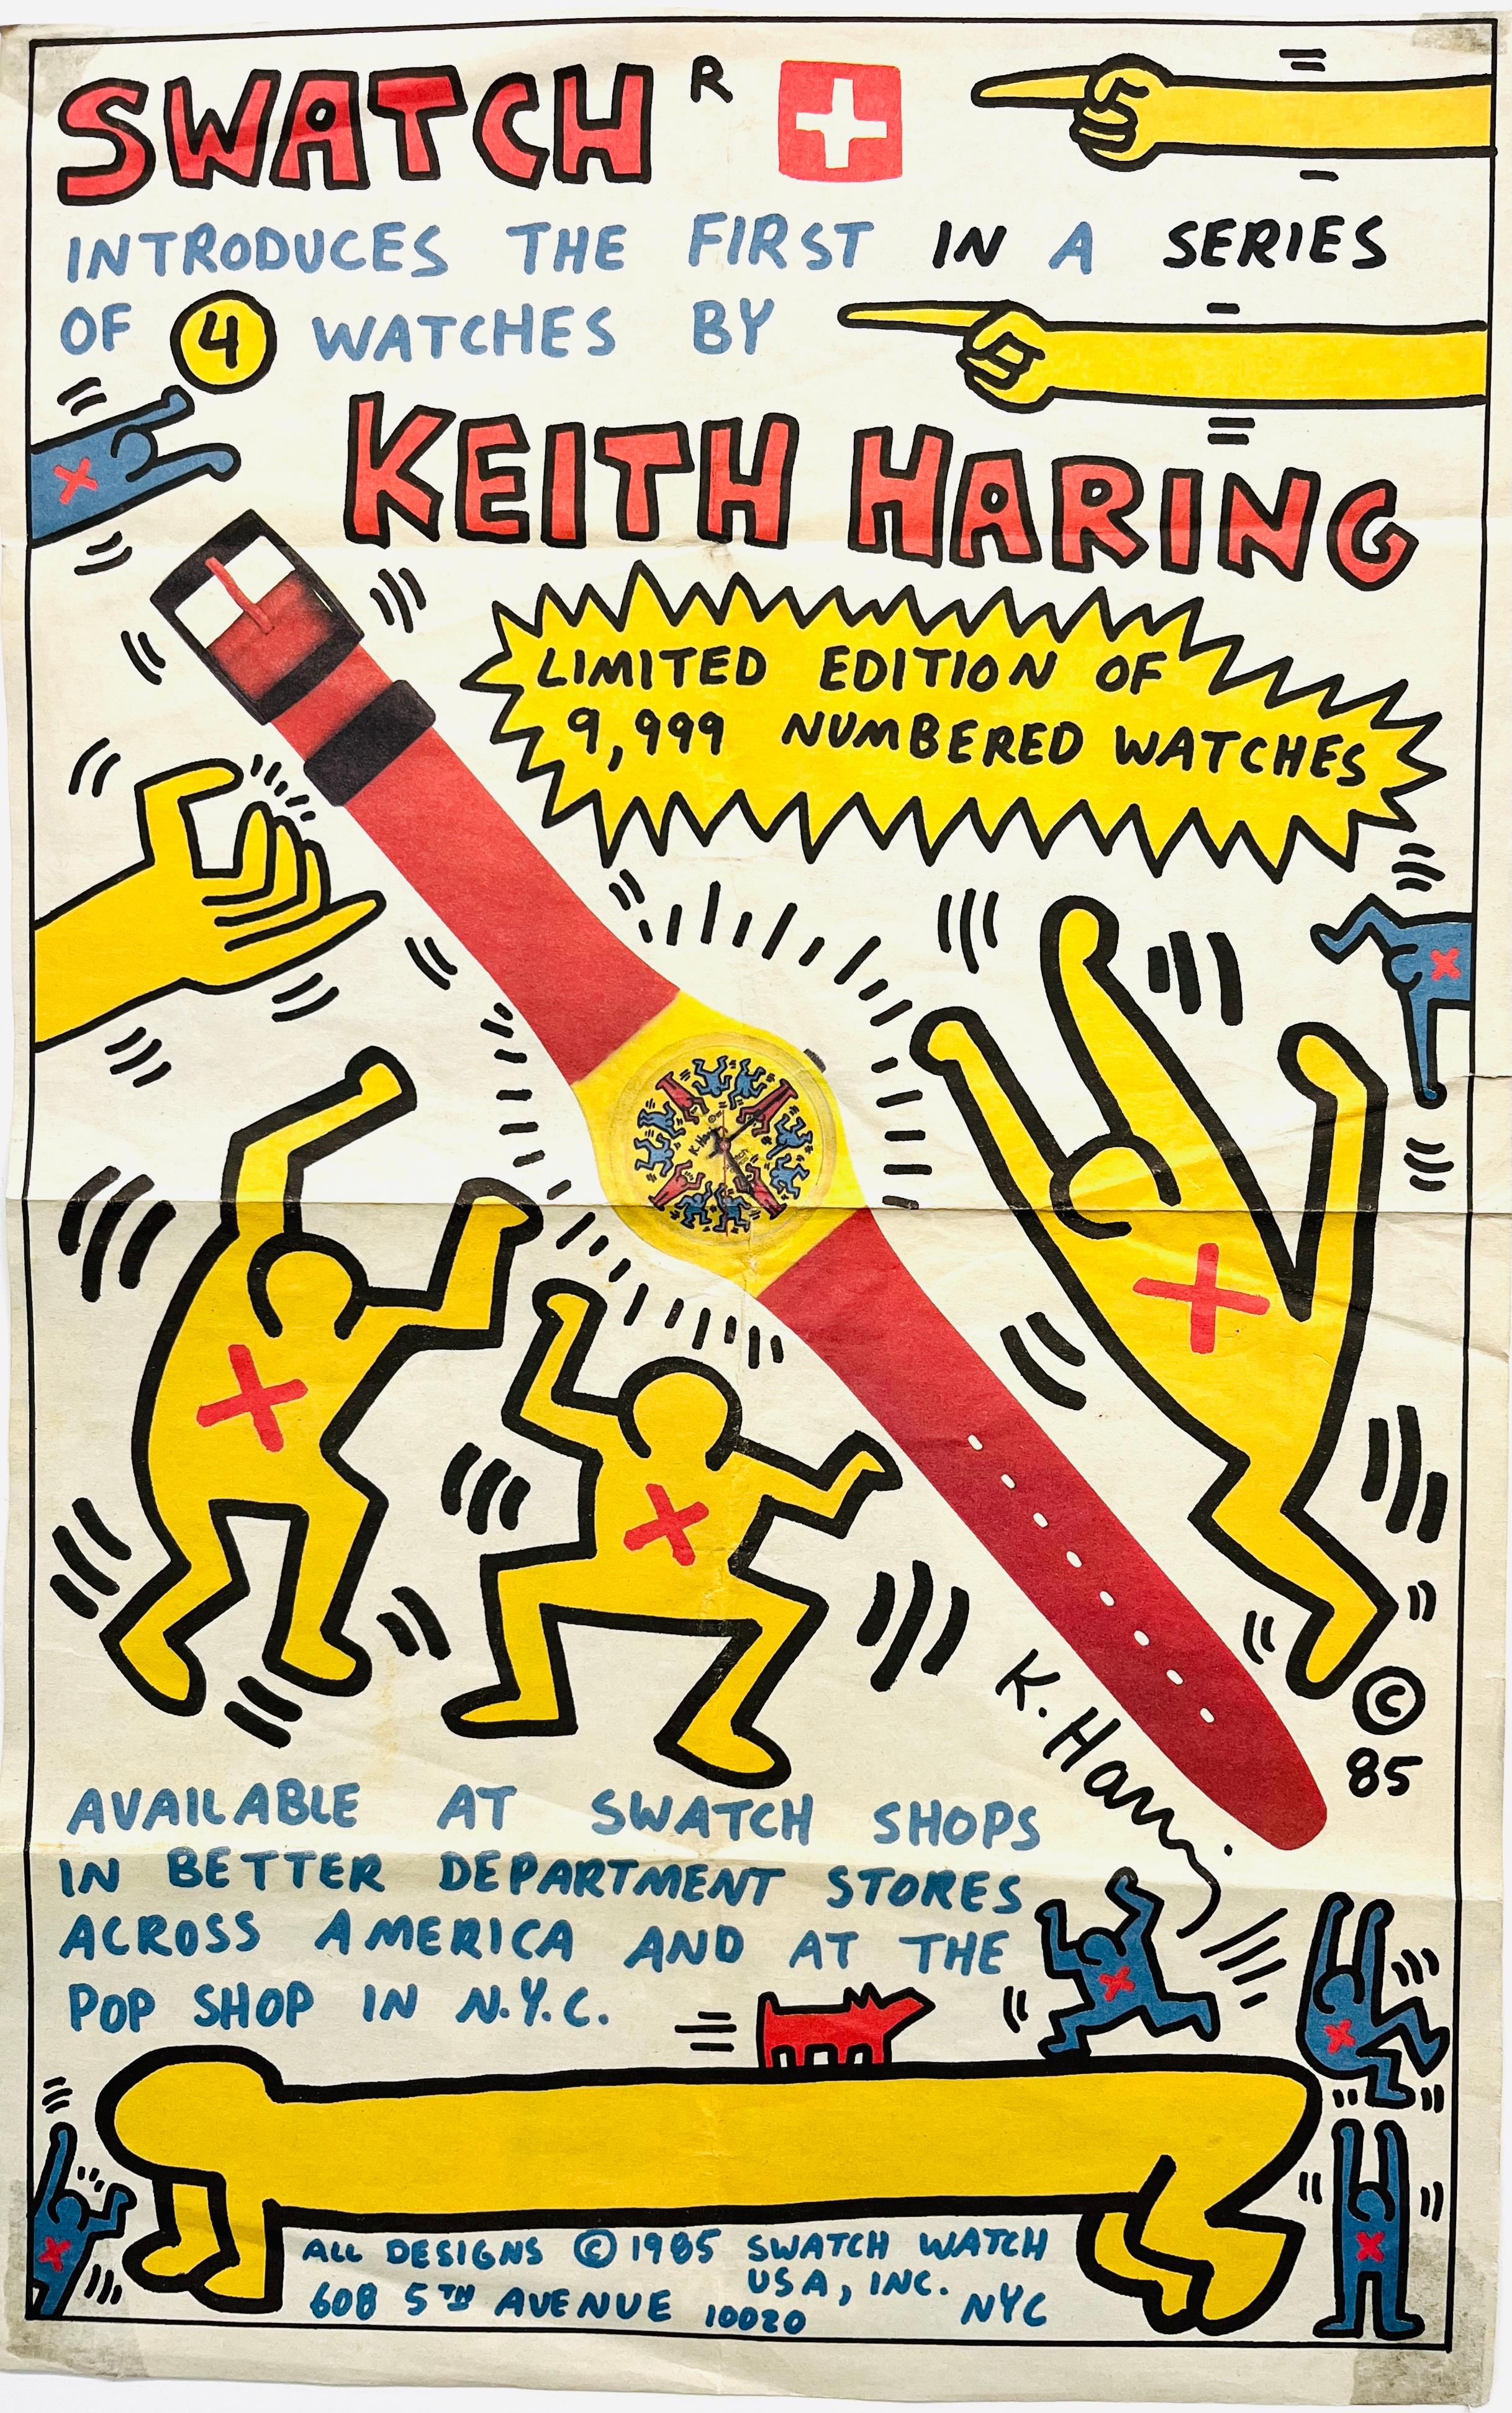 Keith Haring Pop Shop Swatch poster advertisement 1985:

A rare vintage 1980s advertisement designed by Keith Haring to promote the sale of his designs for Swatch at the Keith Haring Pop Shop & Swatch stores.

Offset printed advertisement on